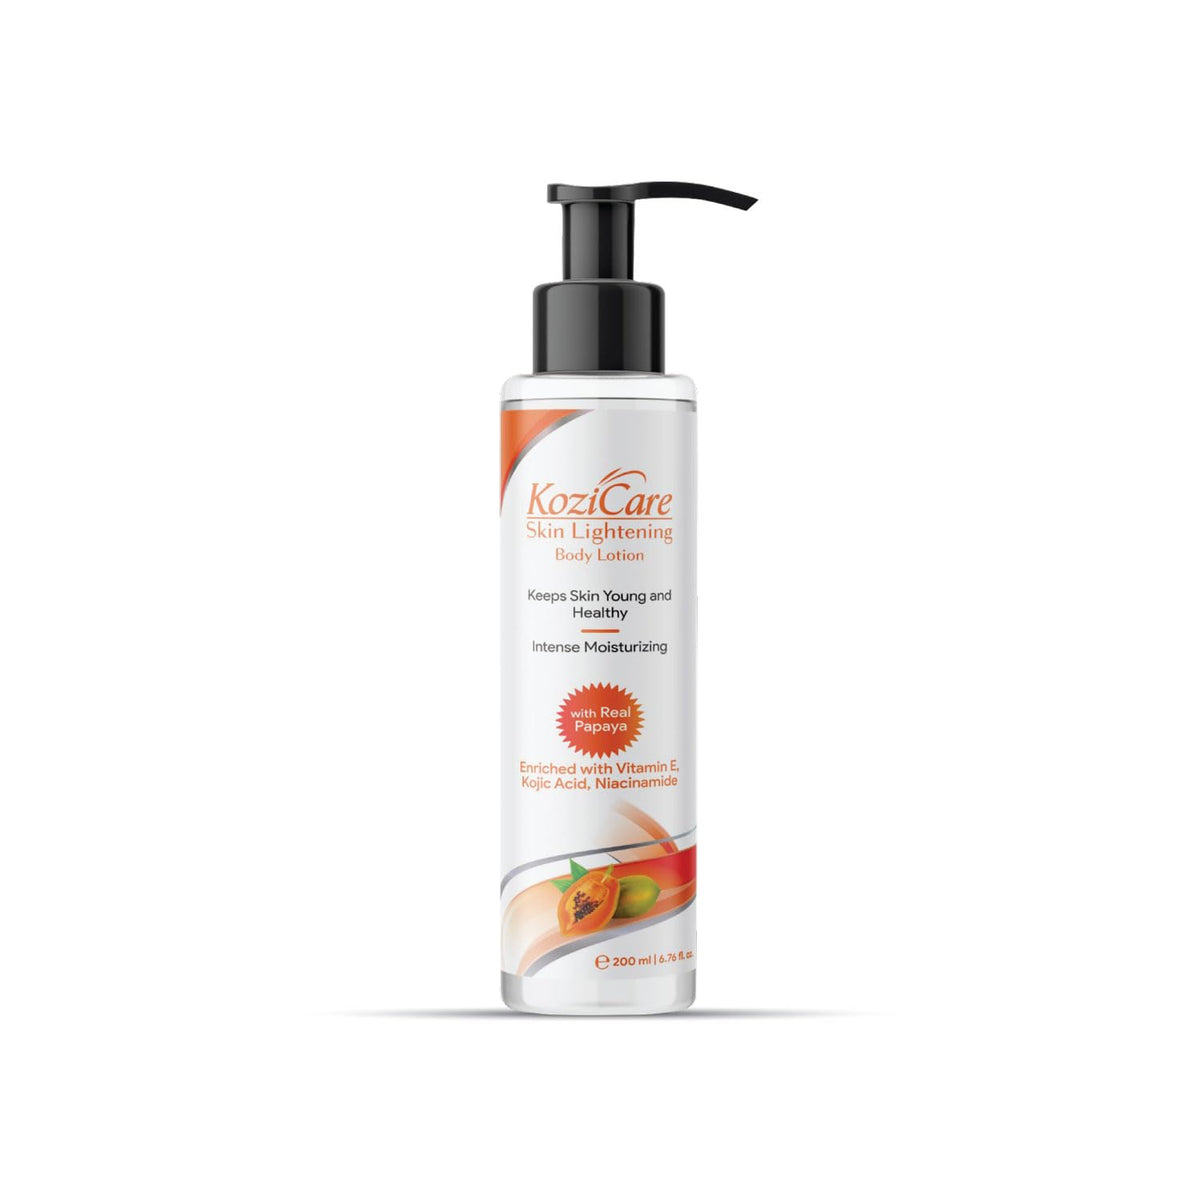 Kozicare Papaya Lightening/Brightening Body Lotion with Papaya, Kojic Acid, Vitamin E, Shea Butter, Niacinamide| Deeply Hydrates and Brightens Skin| For All Skin Types – 200ml